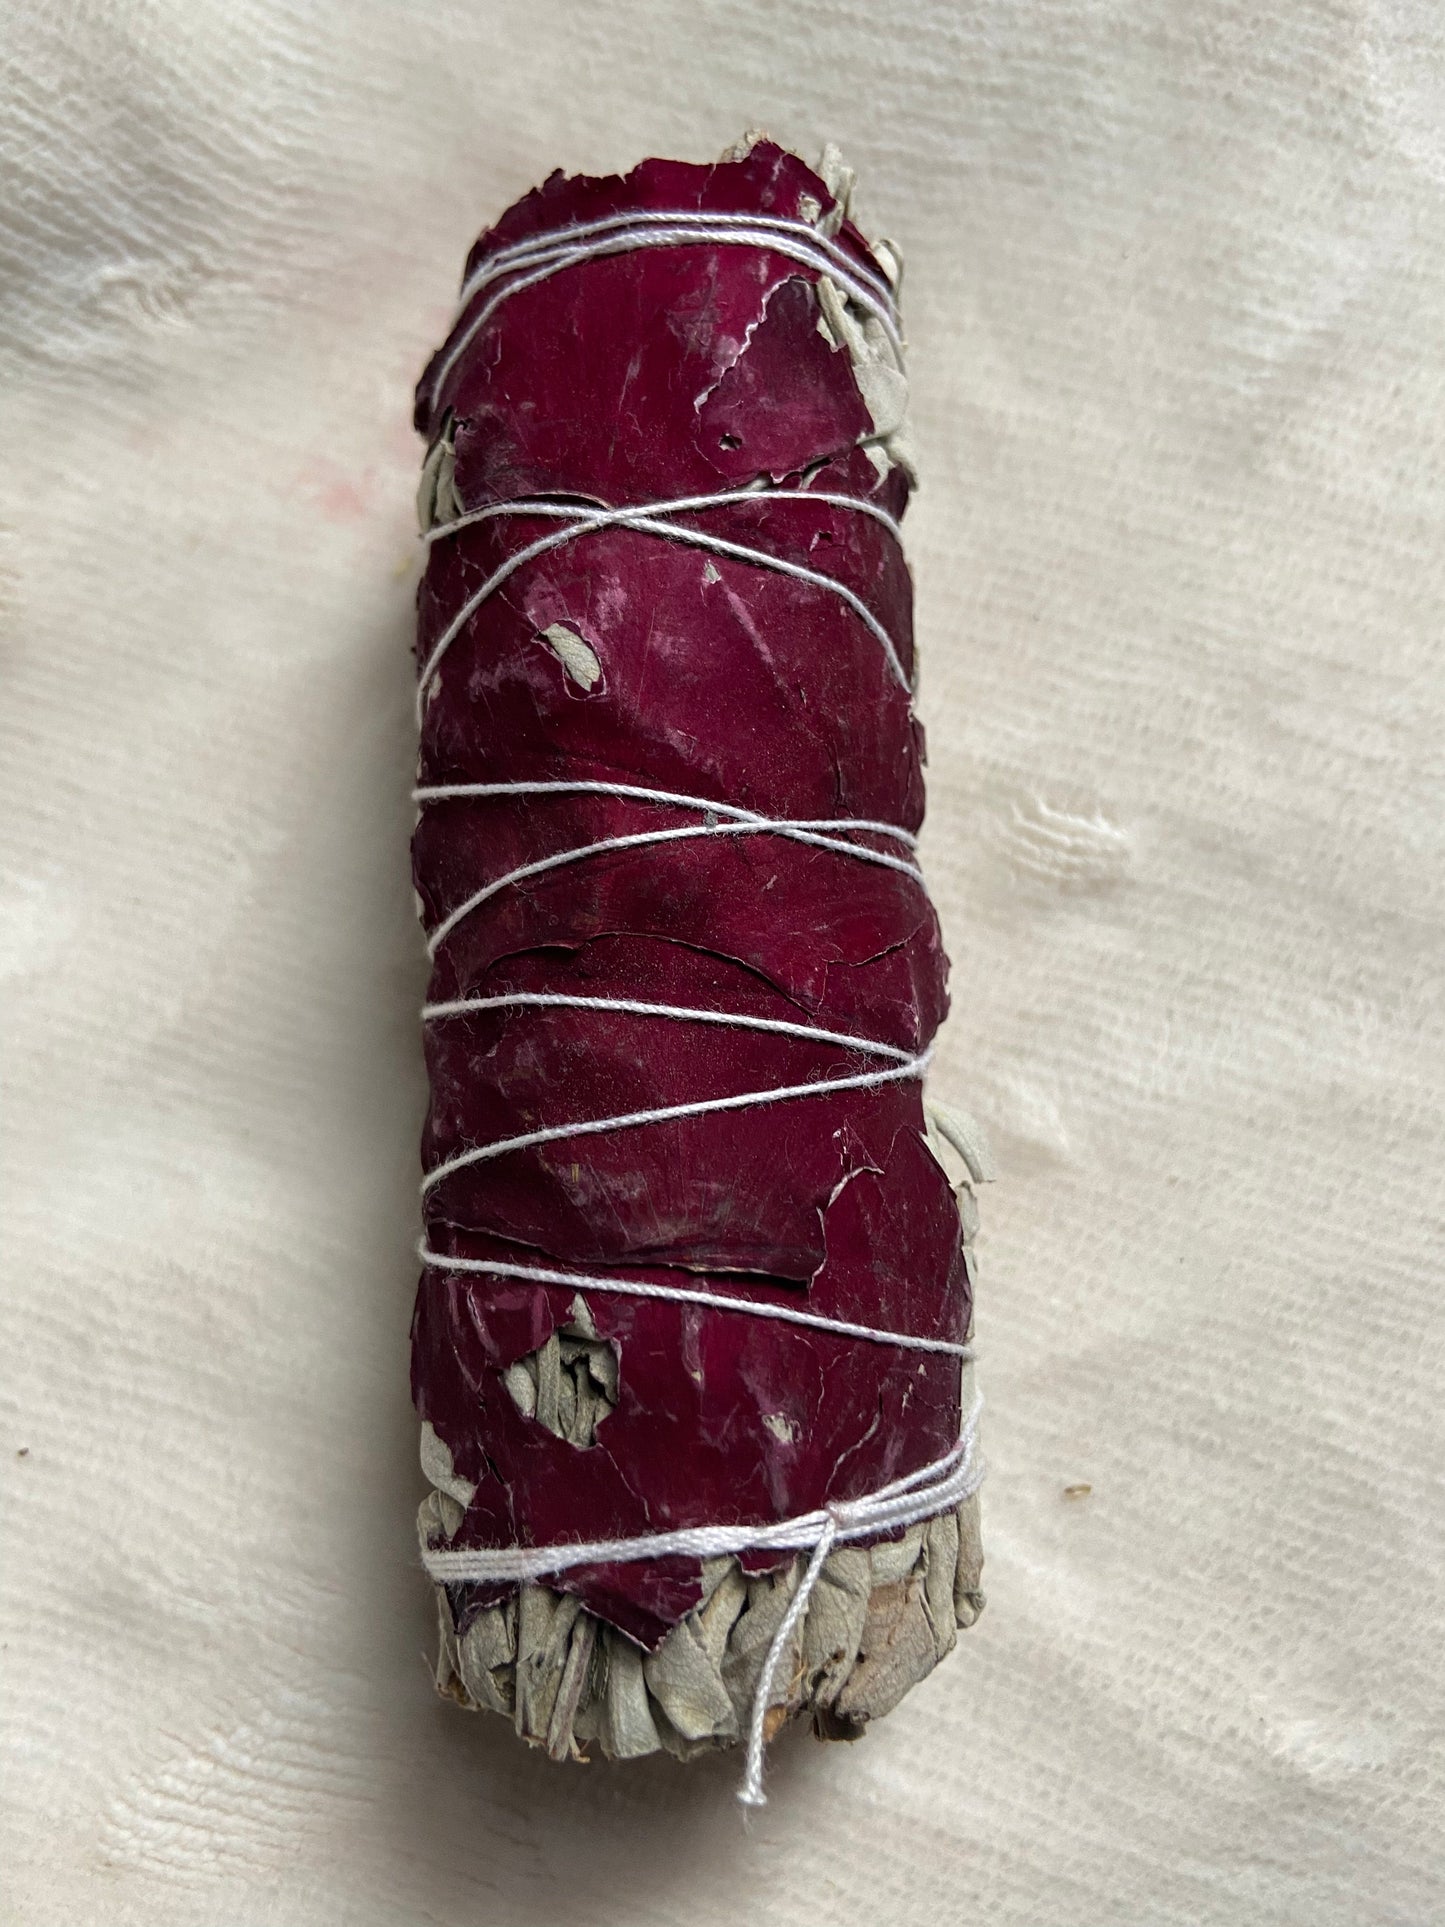  Rose Sage -  available at Amazing Creations Products . Grab yours for $2.50 today!